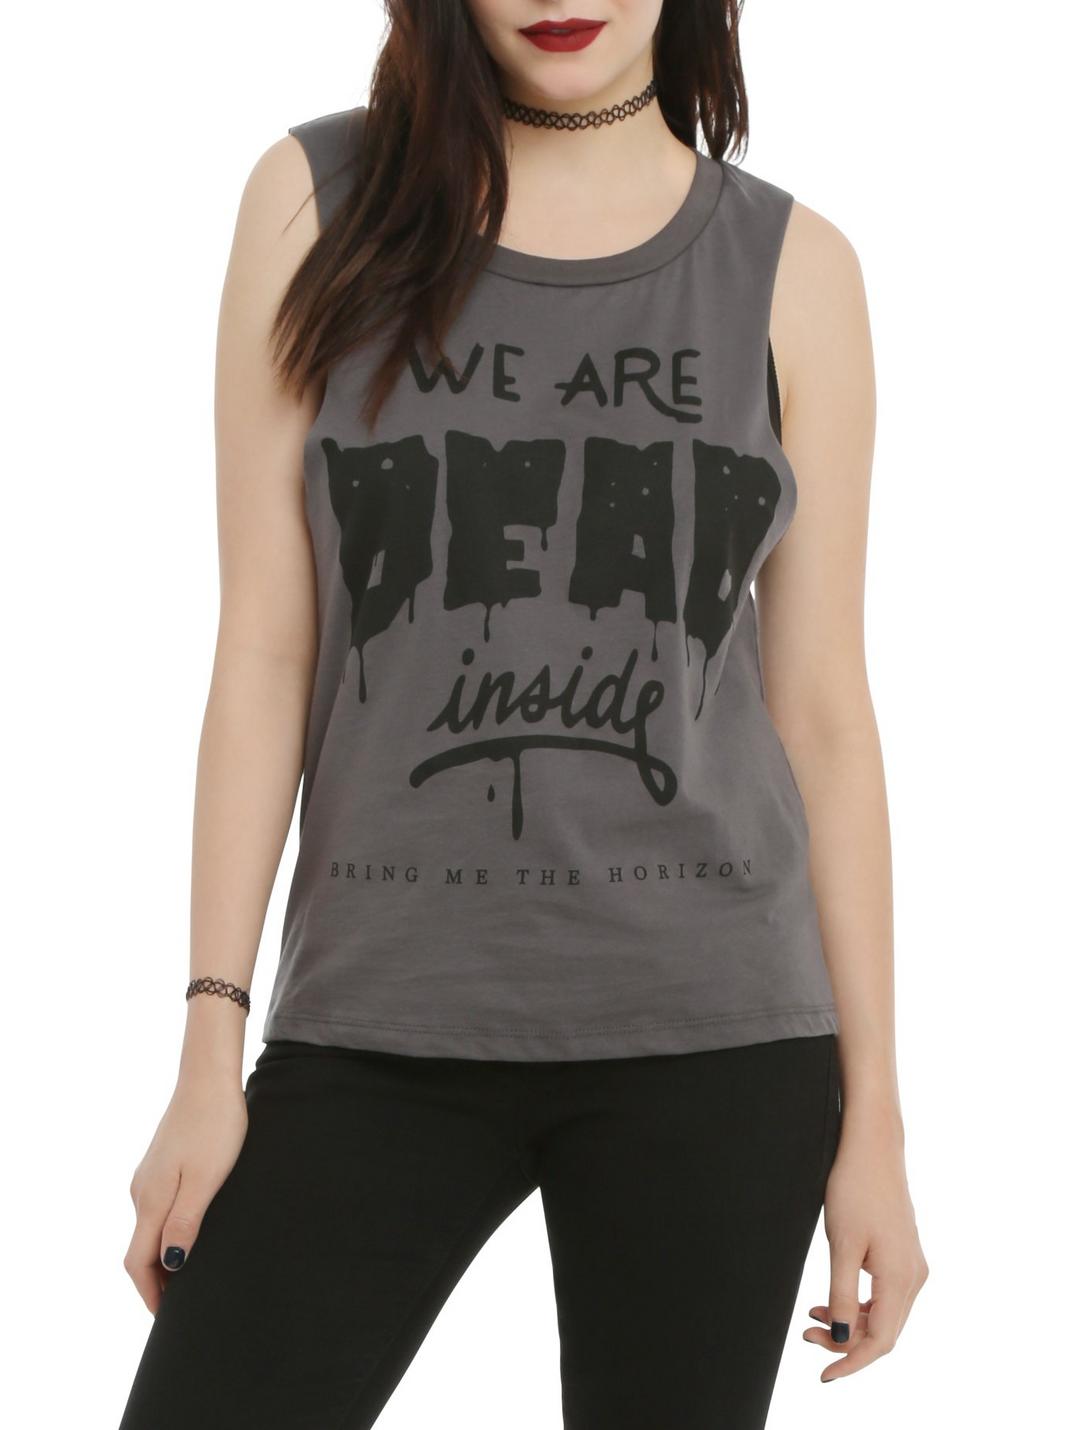 Bring Me The Horizon We Are Dead Inside Girls Muscle Top, CHARCOAL, hi-res